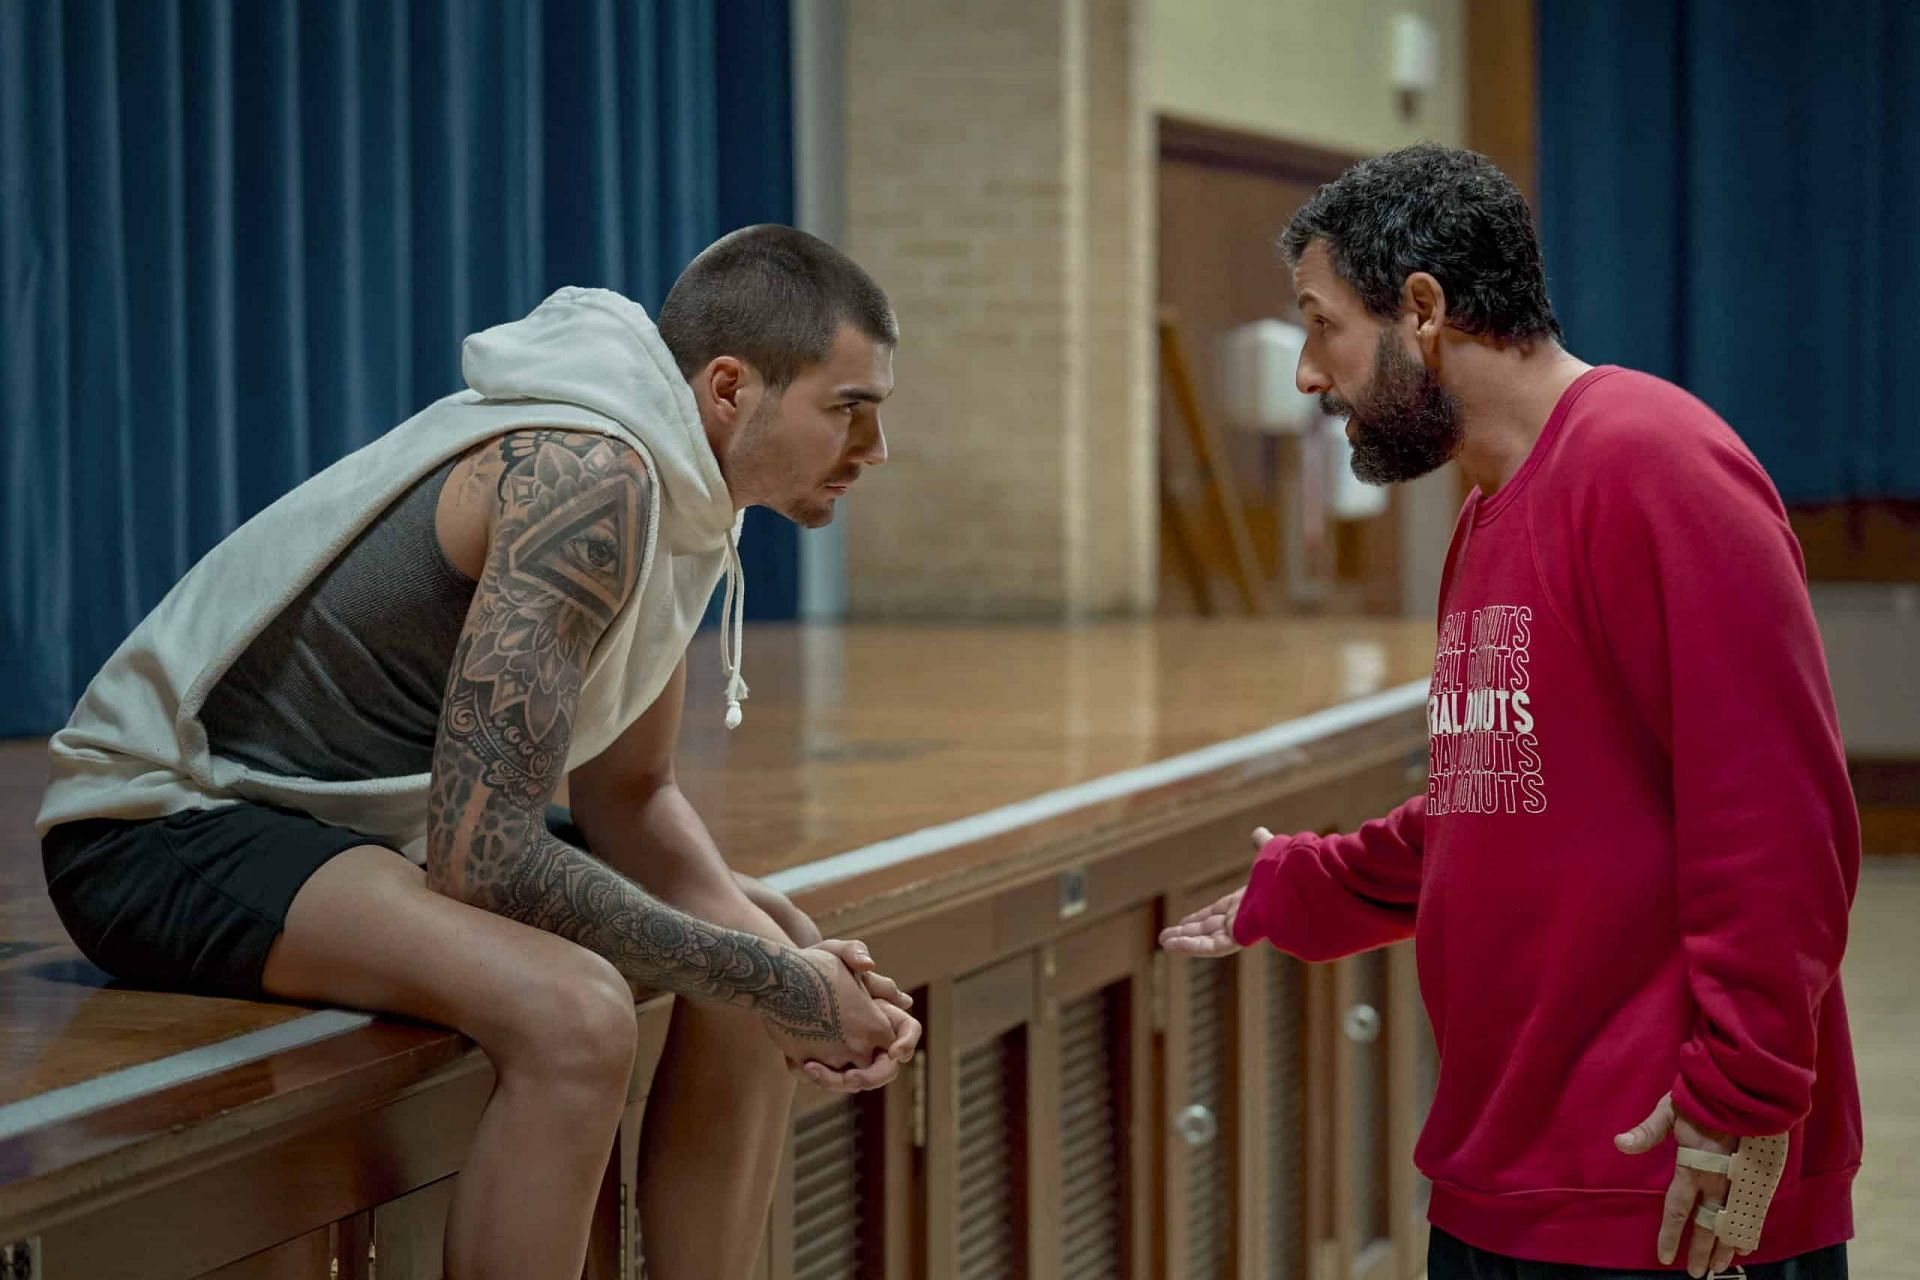 Stanley Sugerman talks about his love for basketball with Bo Cruz (Image via Netflix)